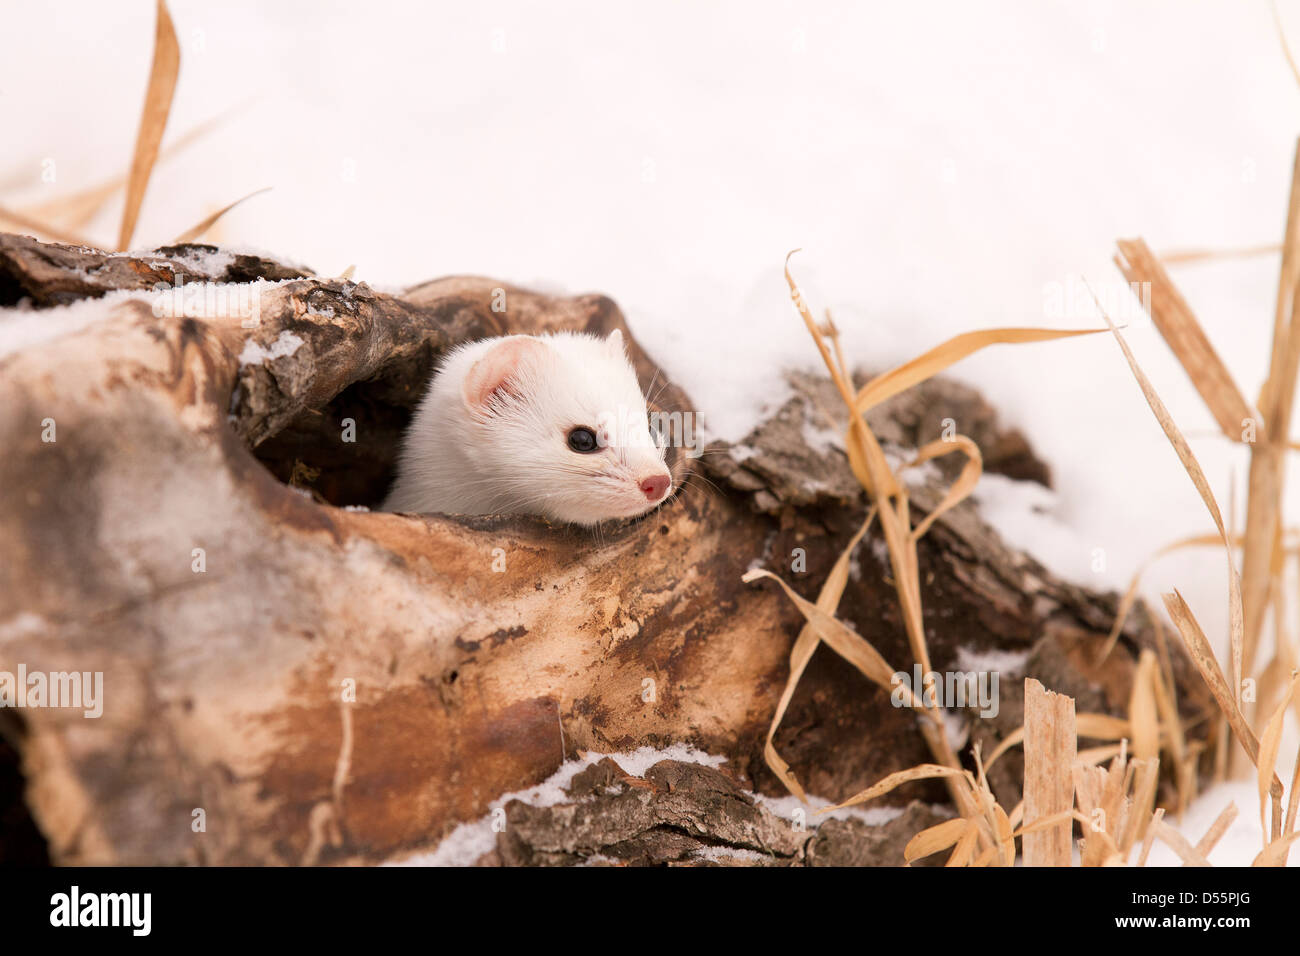 White Weasel in a hollow log Stock Photo